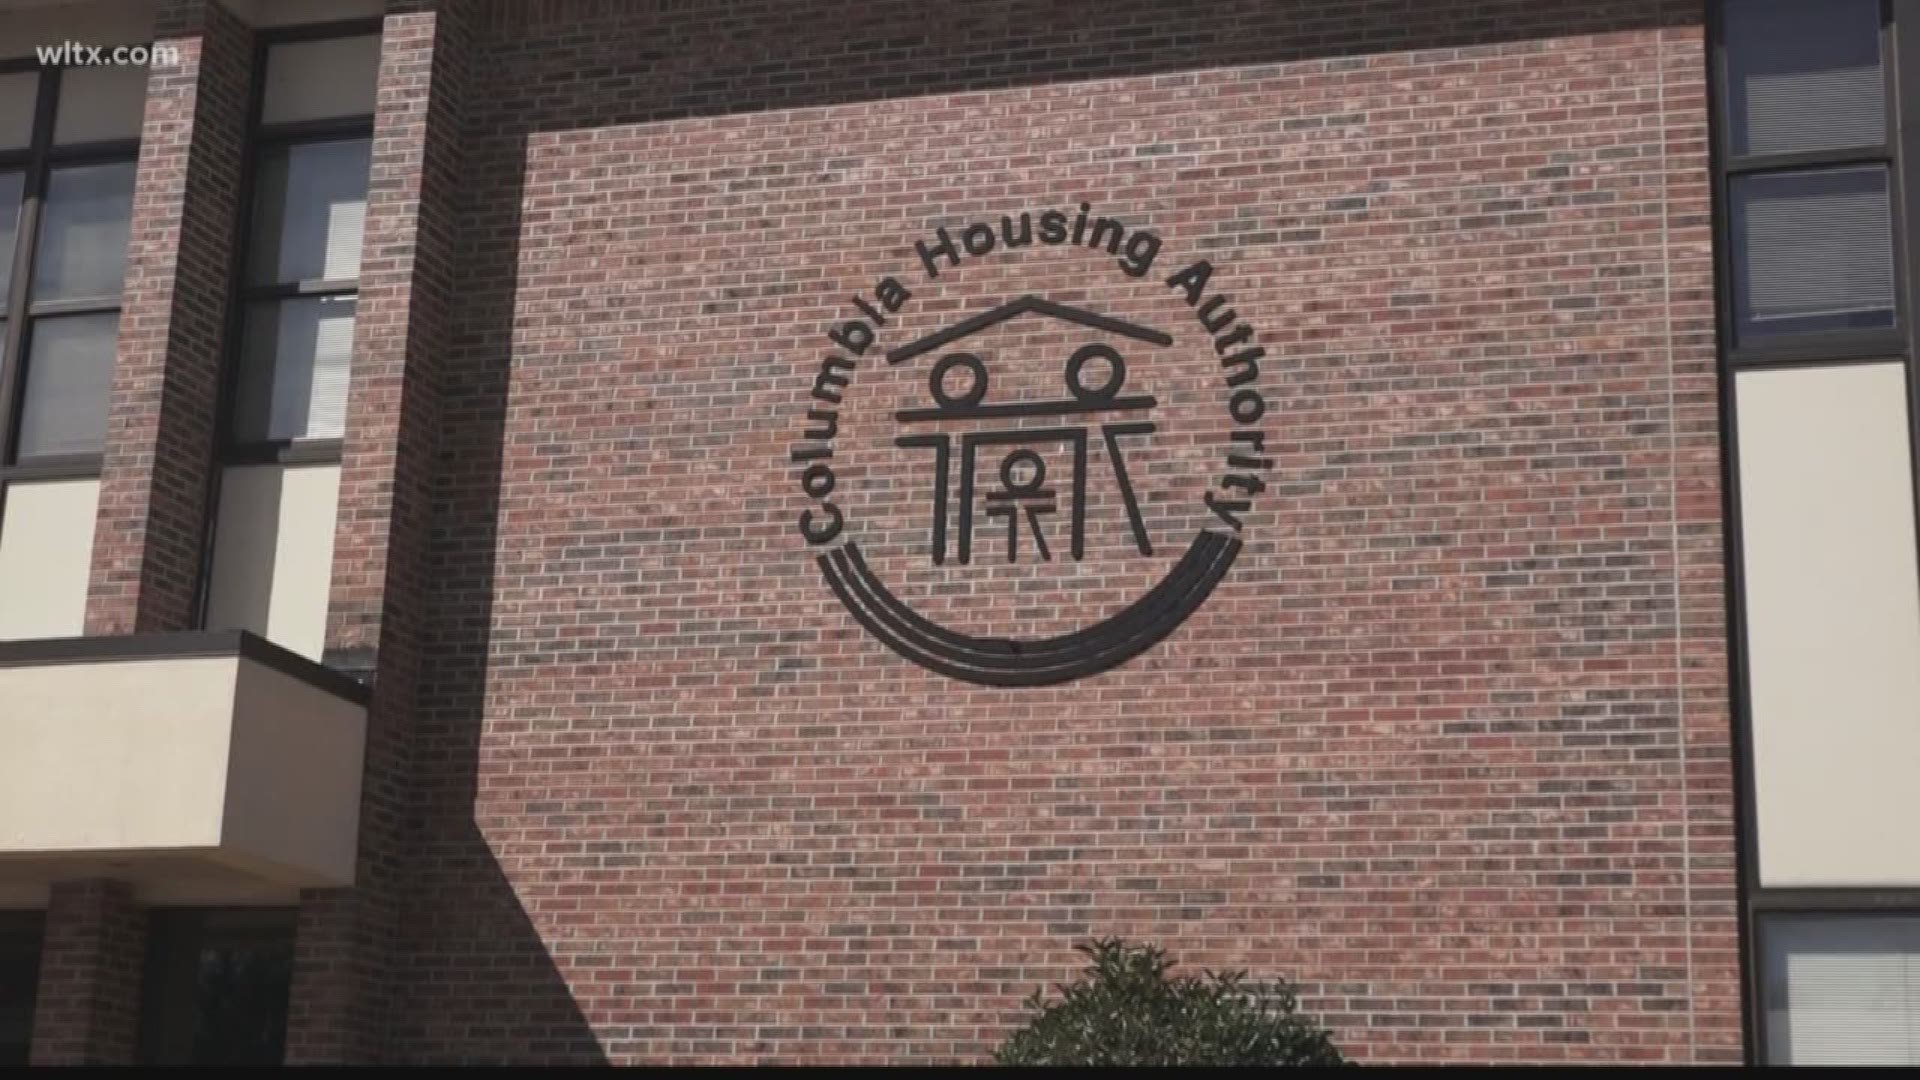 The Columbia Housing Authority says more than 100 families are still searching for a permanent home.